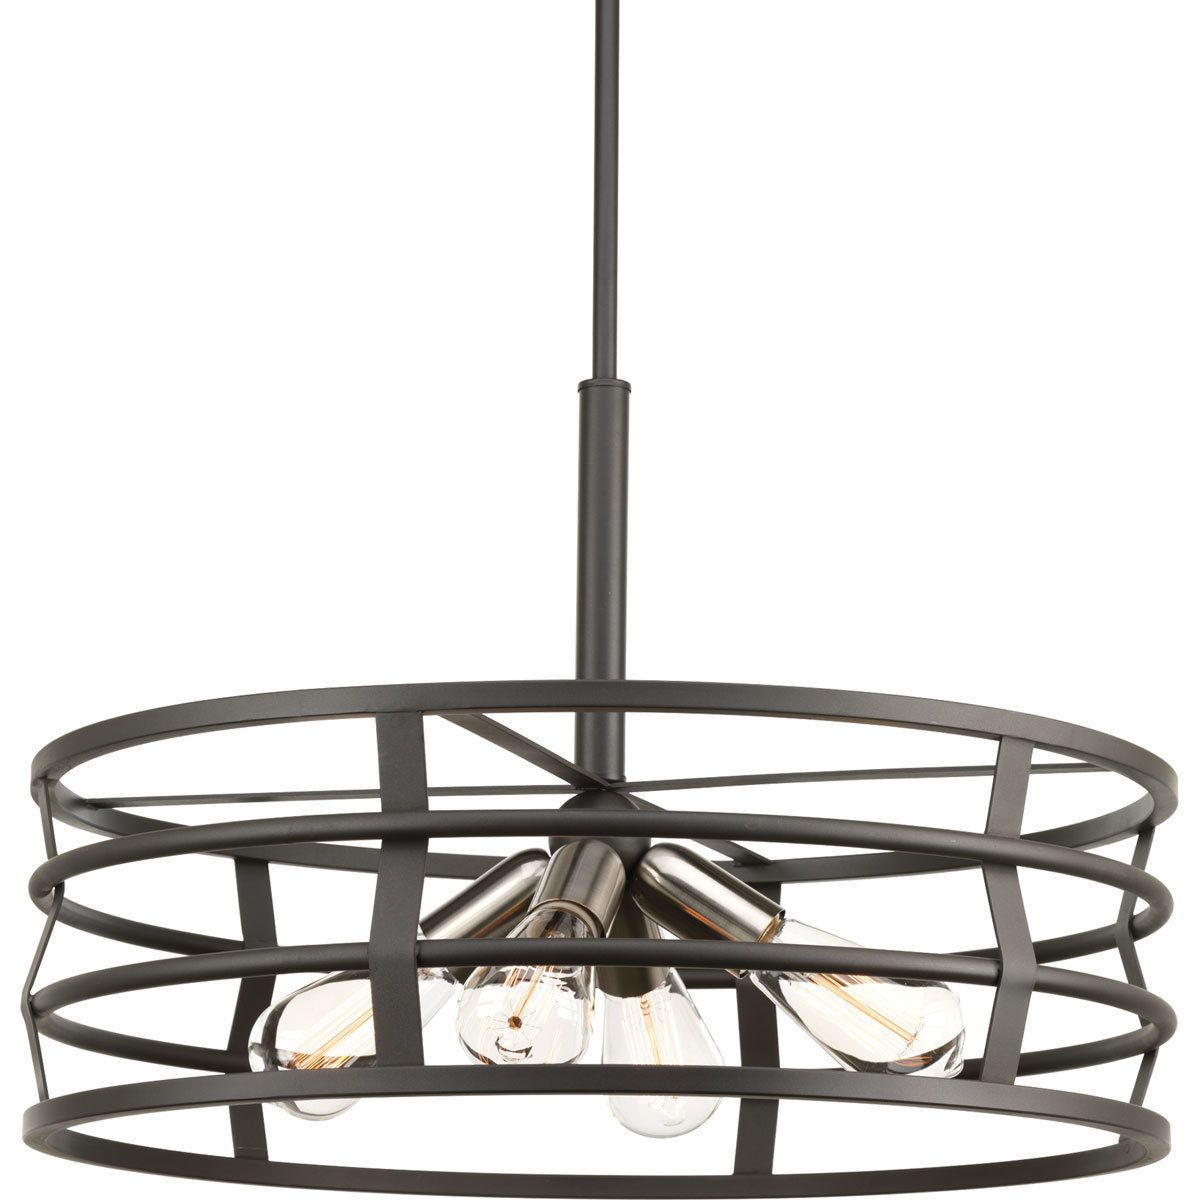 Pattie 4 Light Drum Chandelier Intended For Breithaup 7 Light Drum Chandeliers (View 25 of 30)